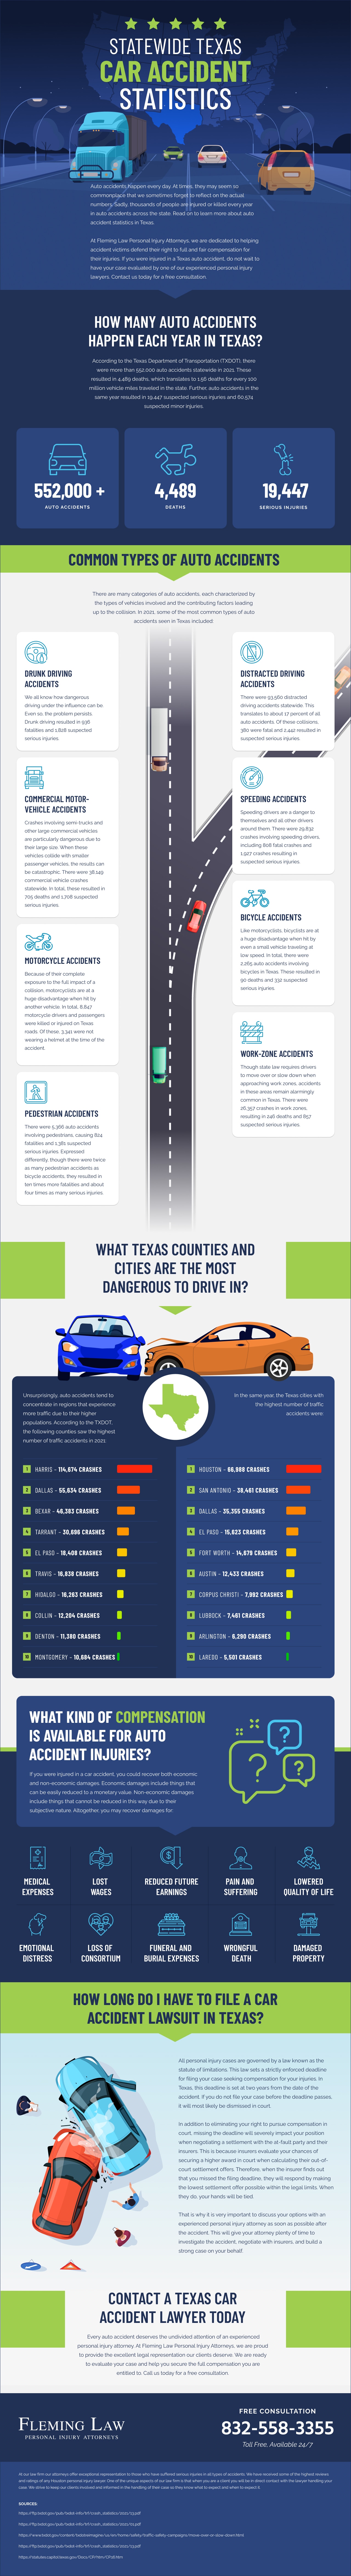 Statewide Texas Car Accident Statistics